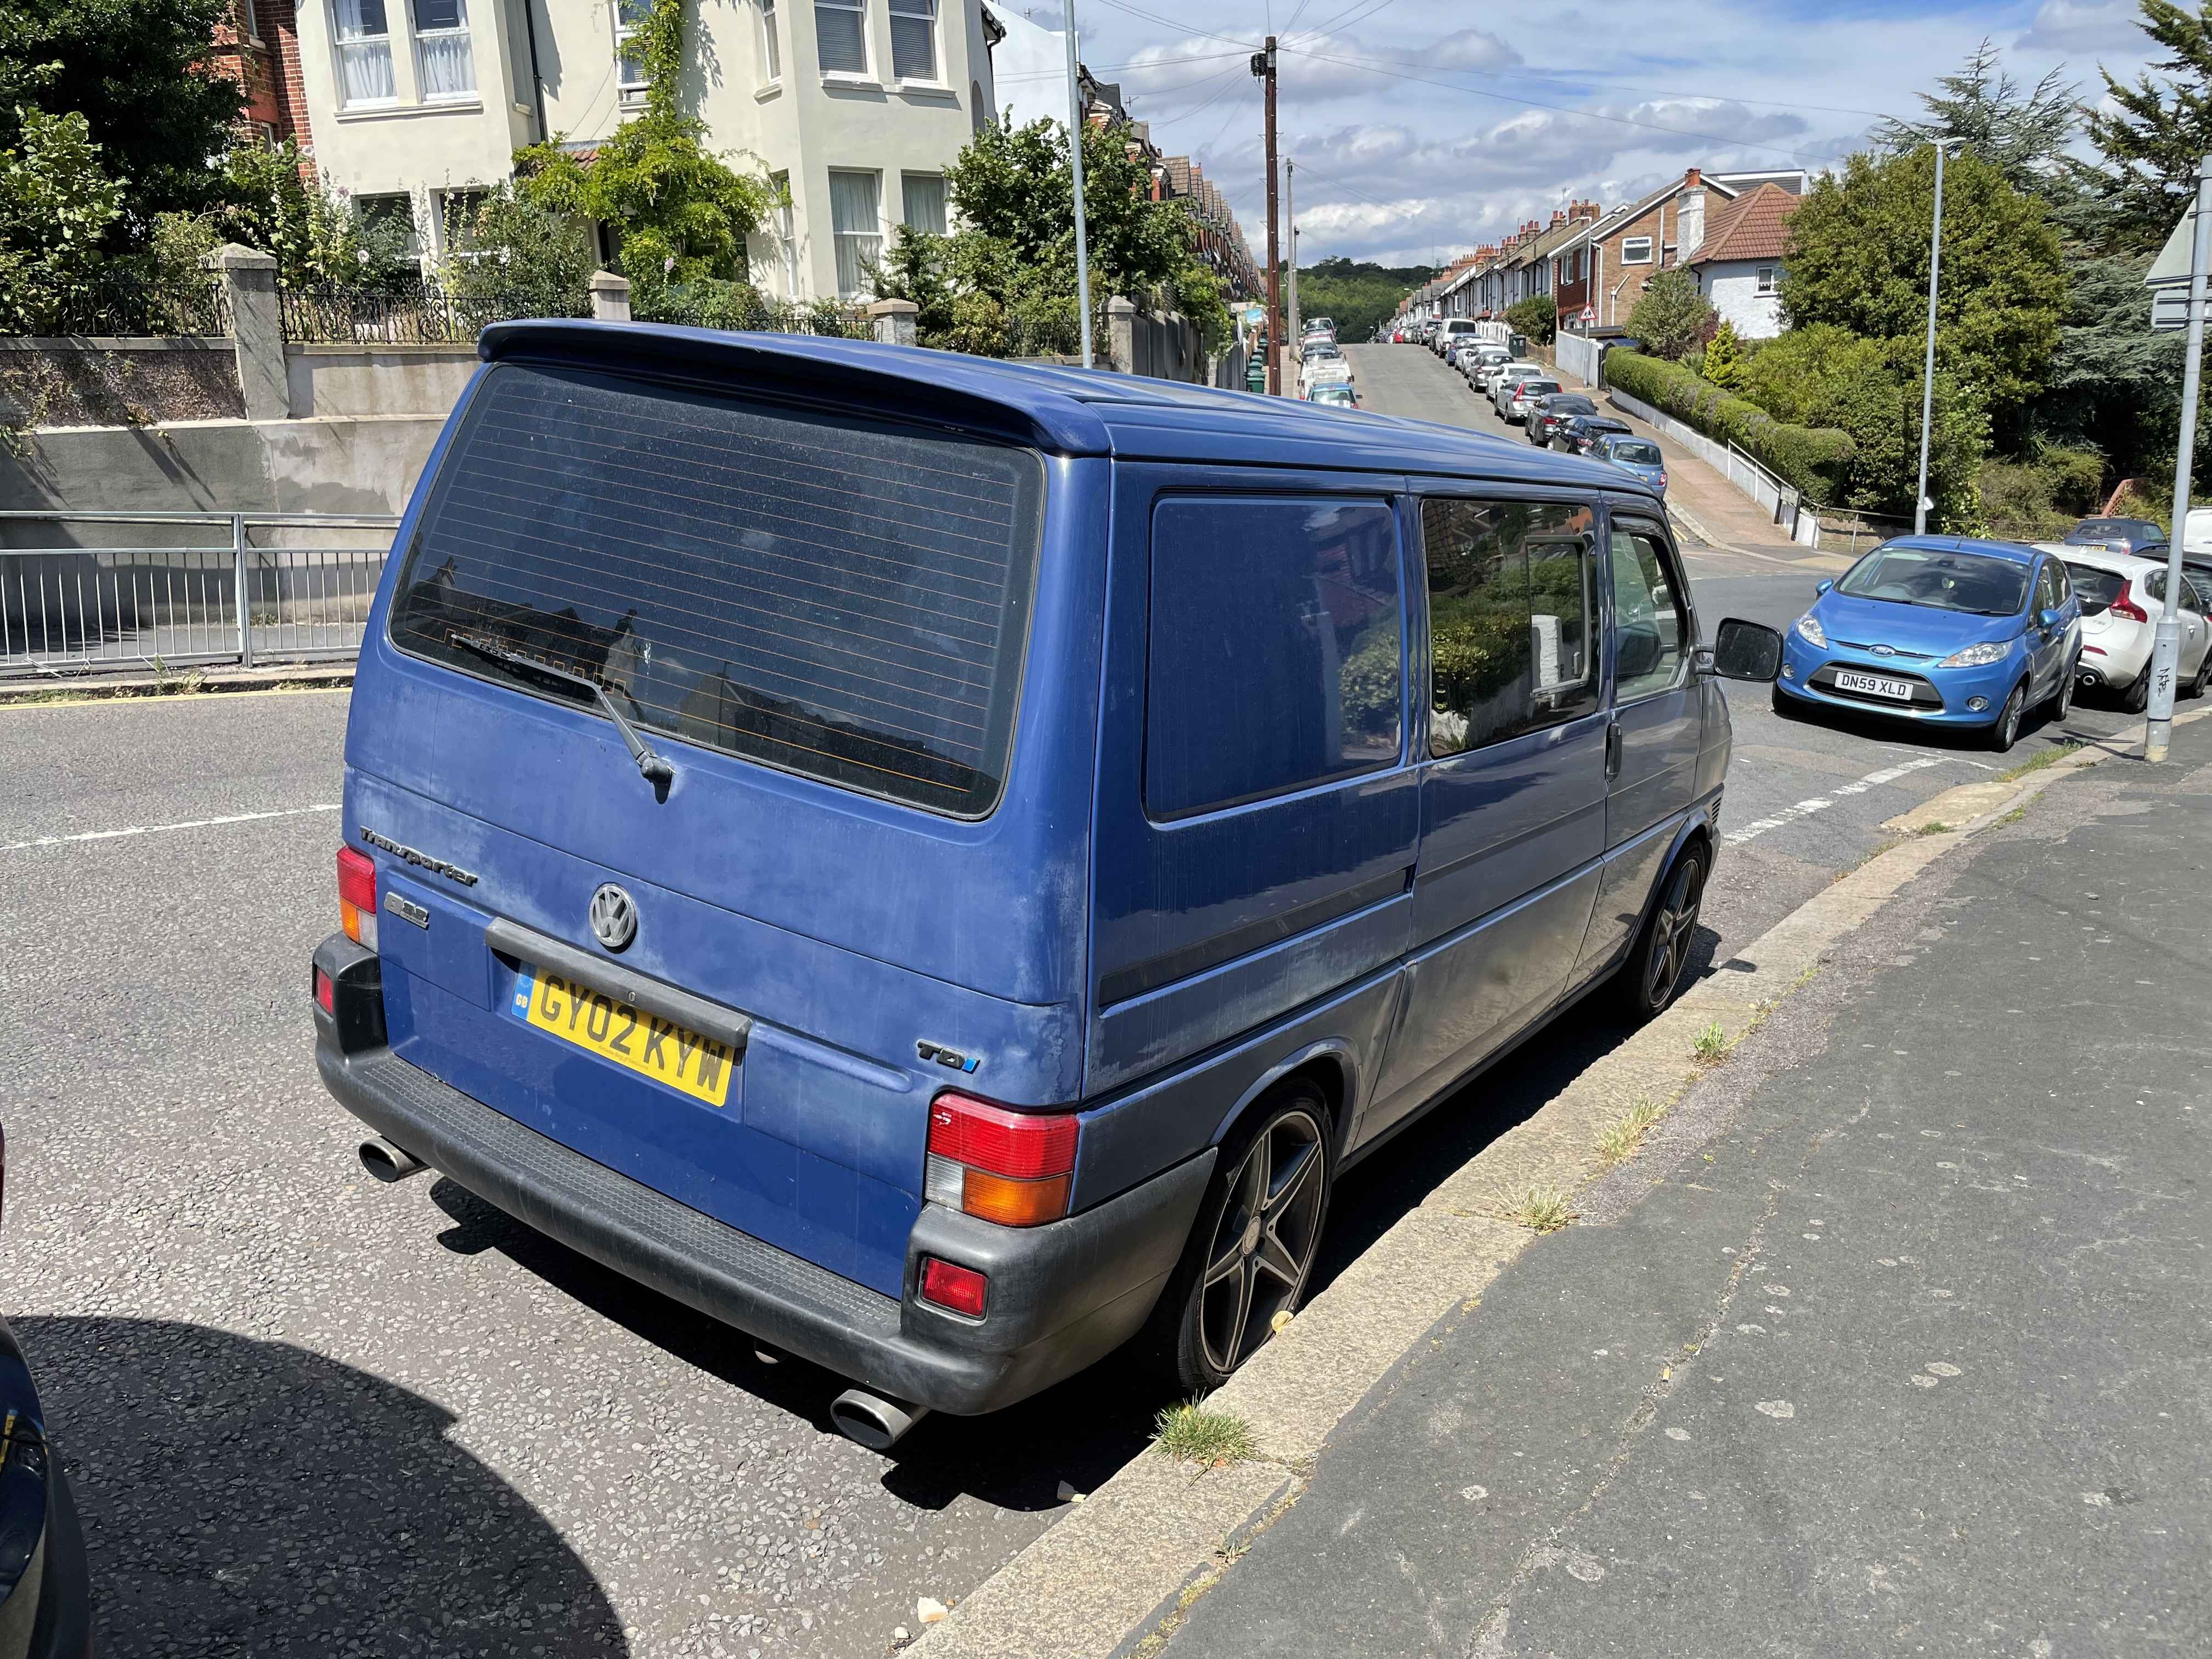 Photograph of GY02 KYW - a Blue Volkswagen Transporter camper van parked in Hollingdean by a non-resident. The fifth of eighteen photographs supplied by the residents of Hollingdean.